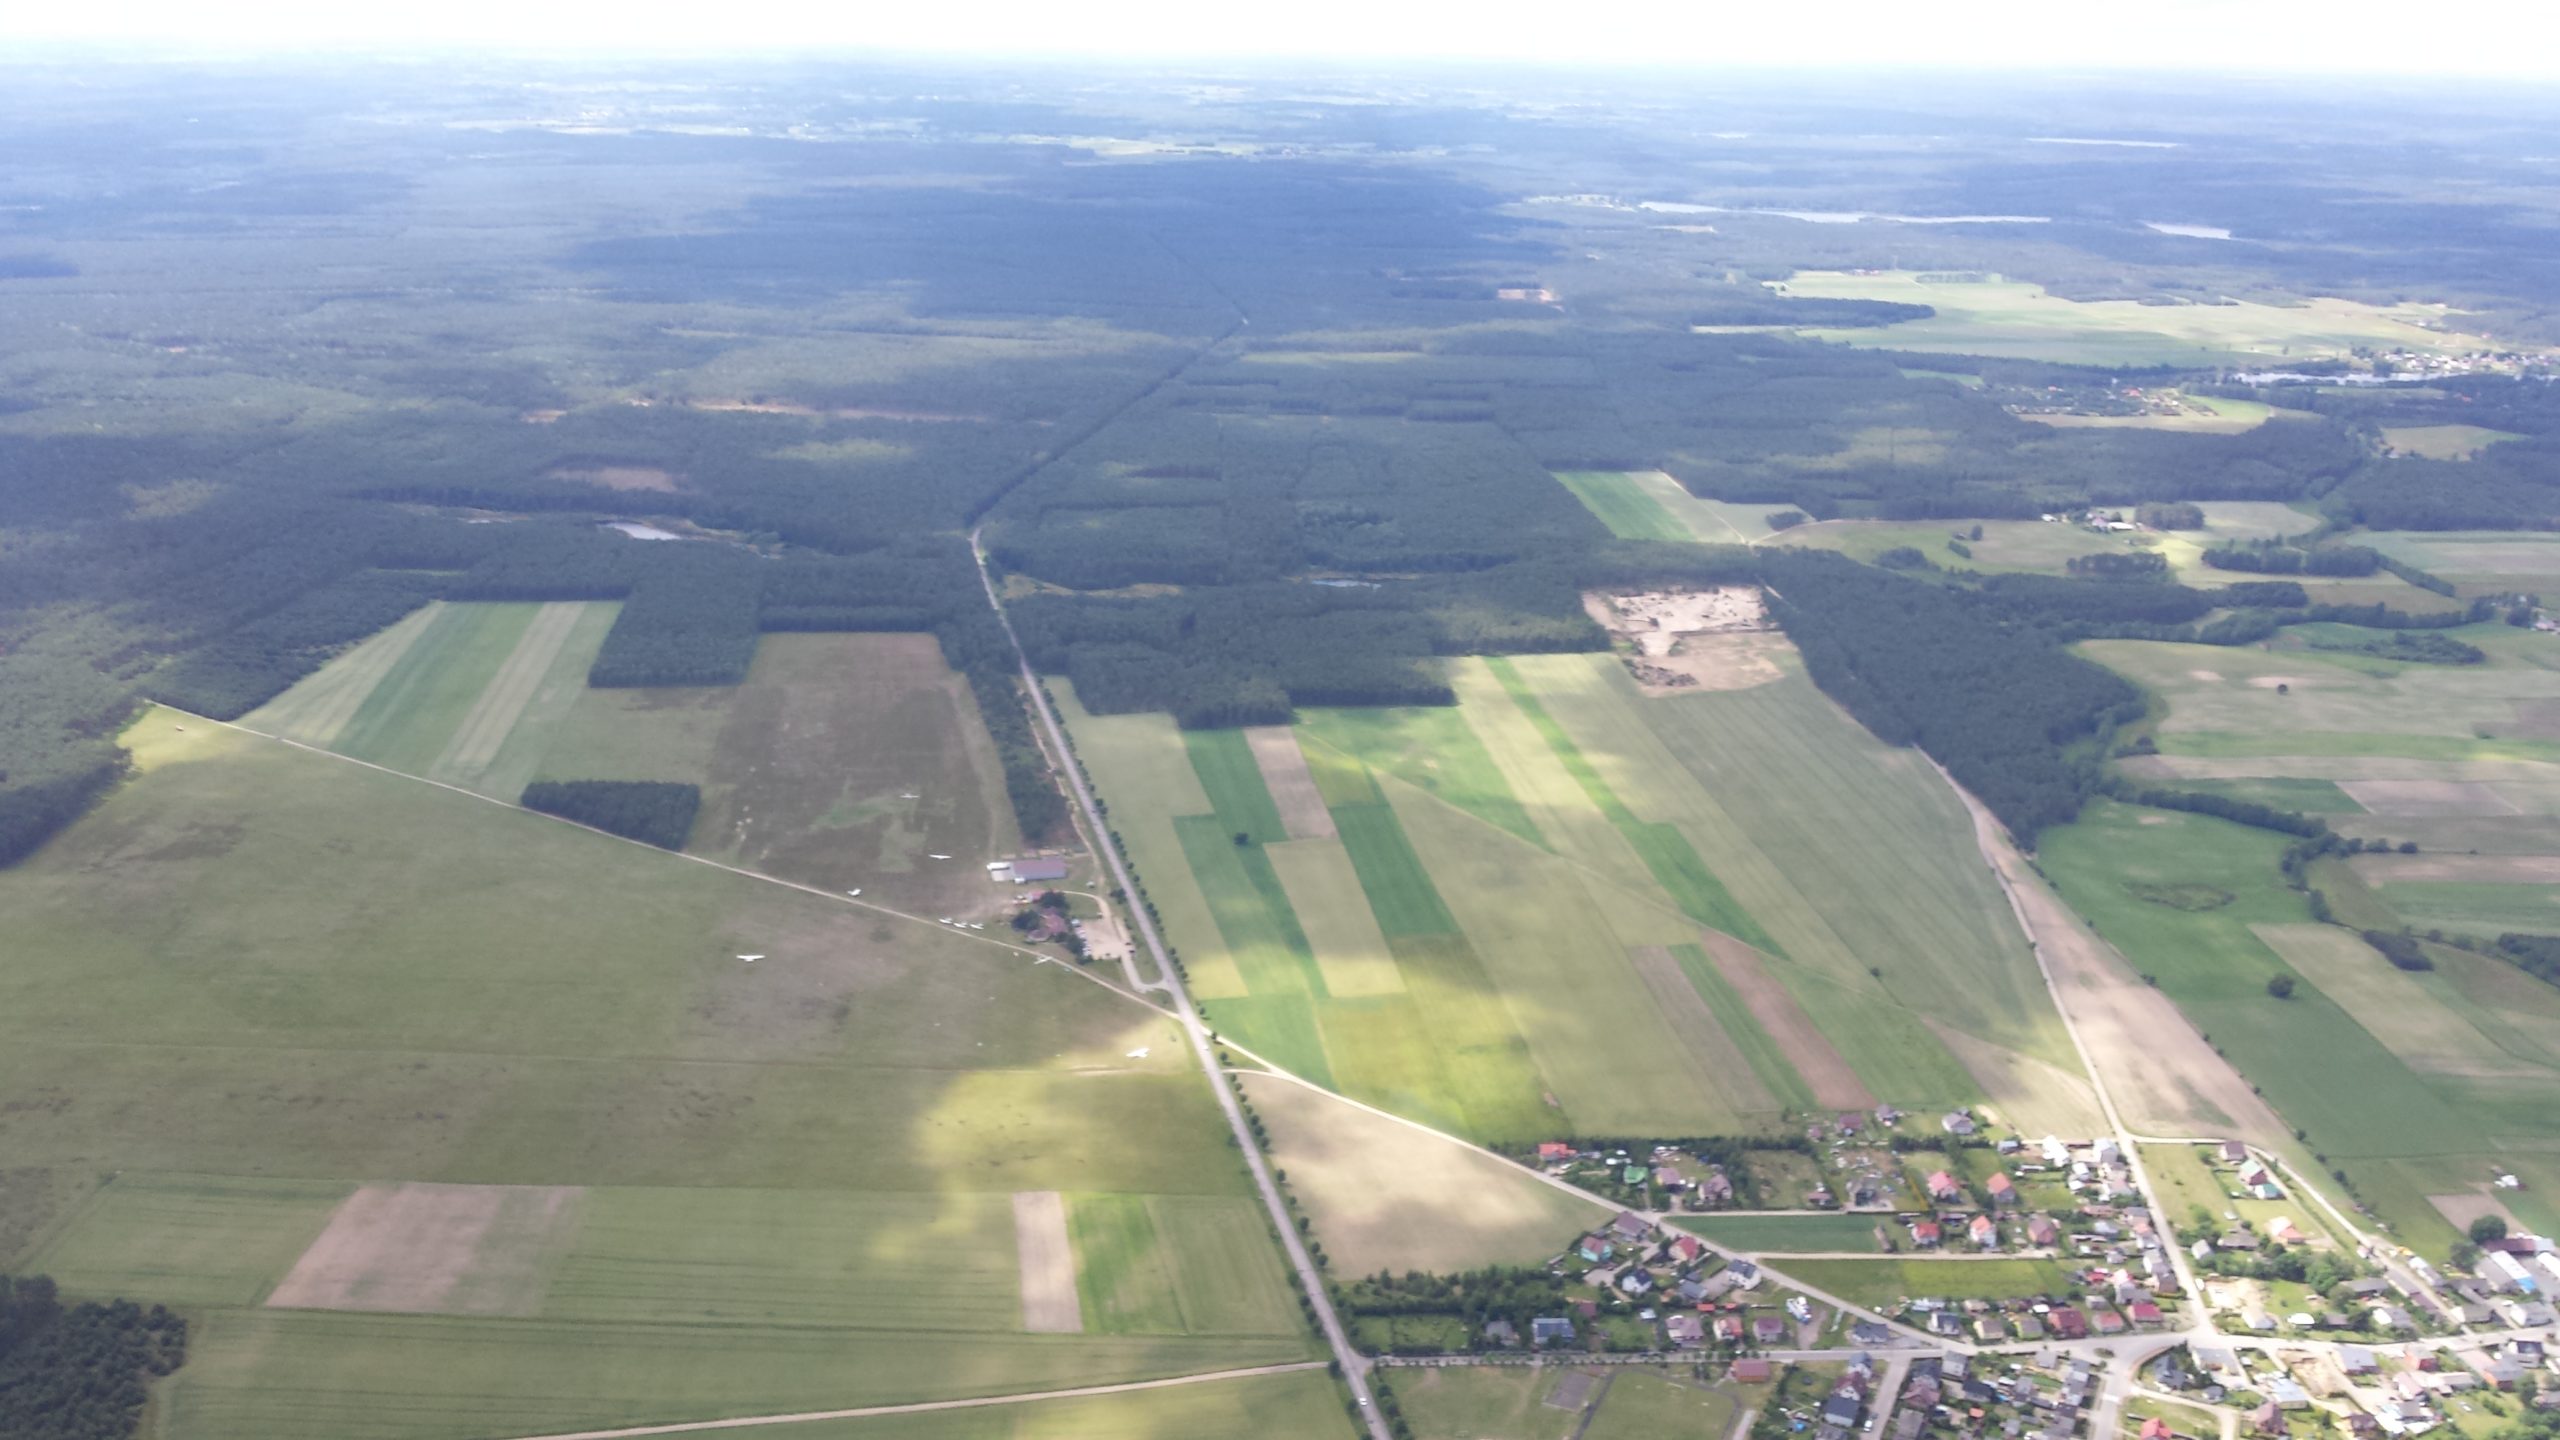 Korne (EPKO) Airfield can be seen along characteristic triangular small forest